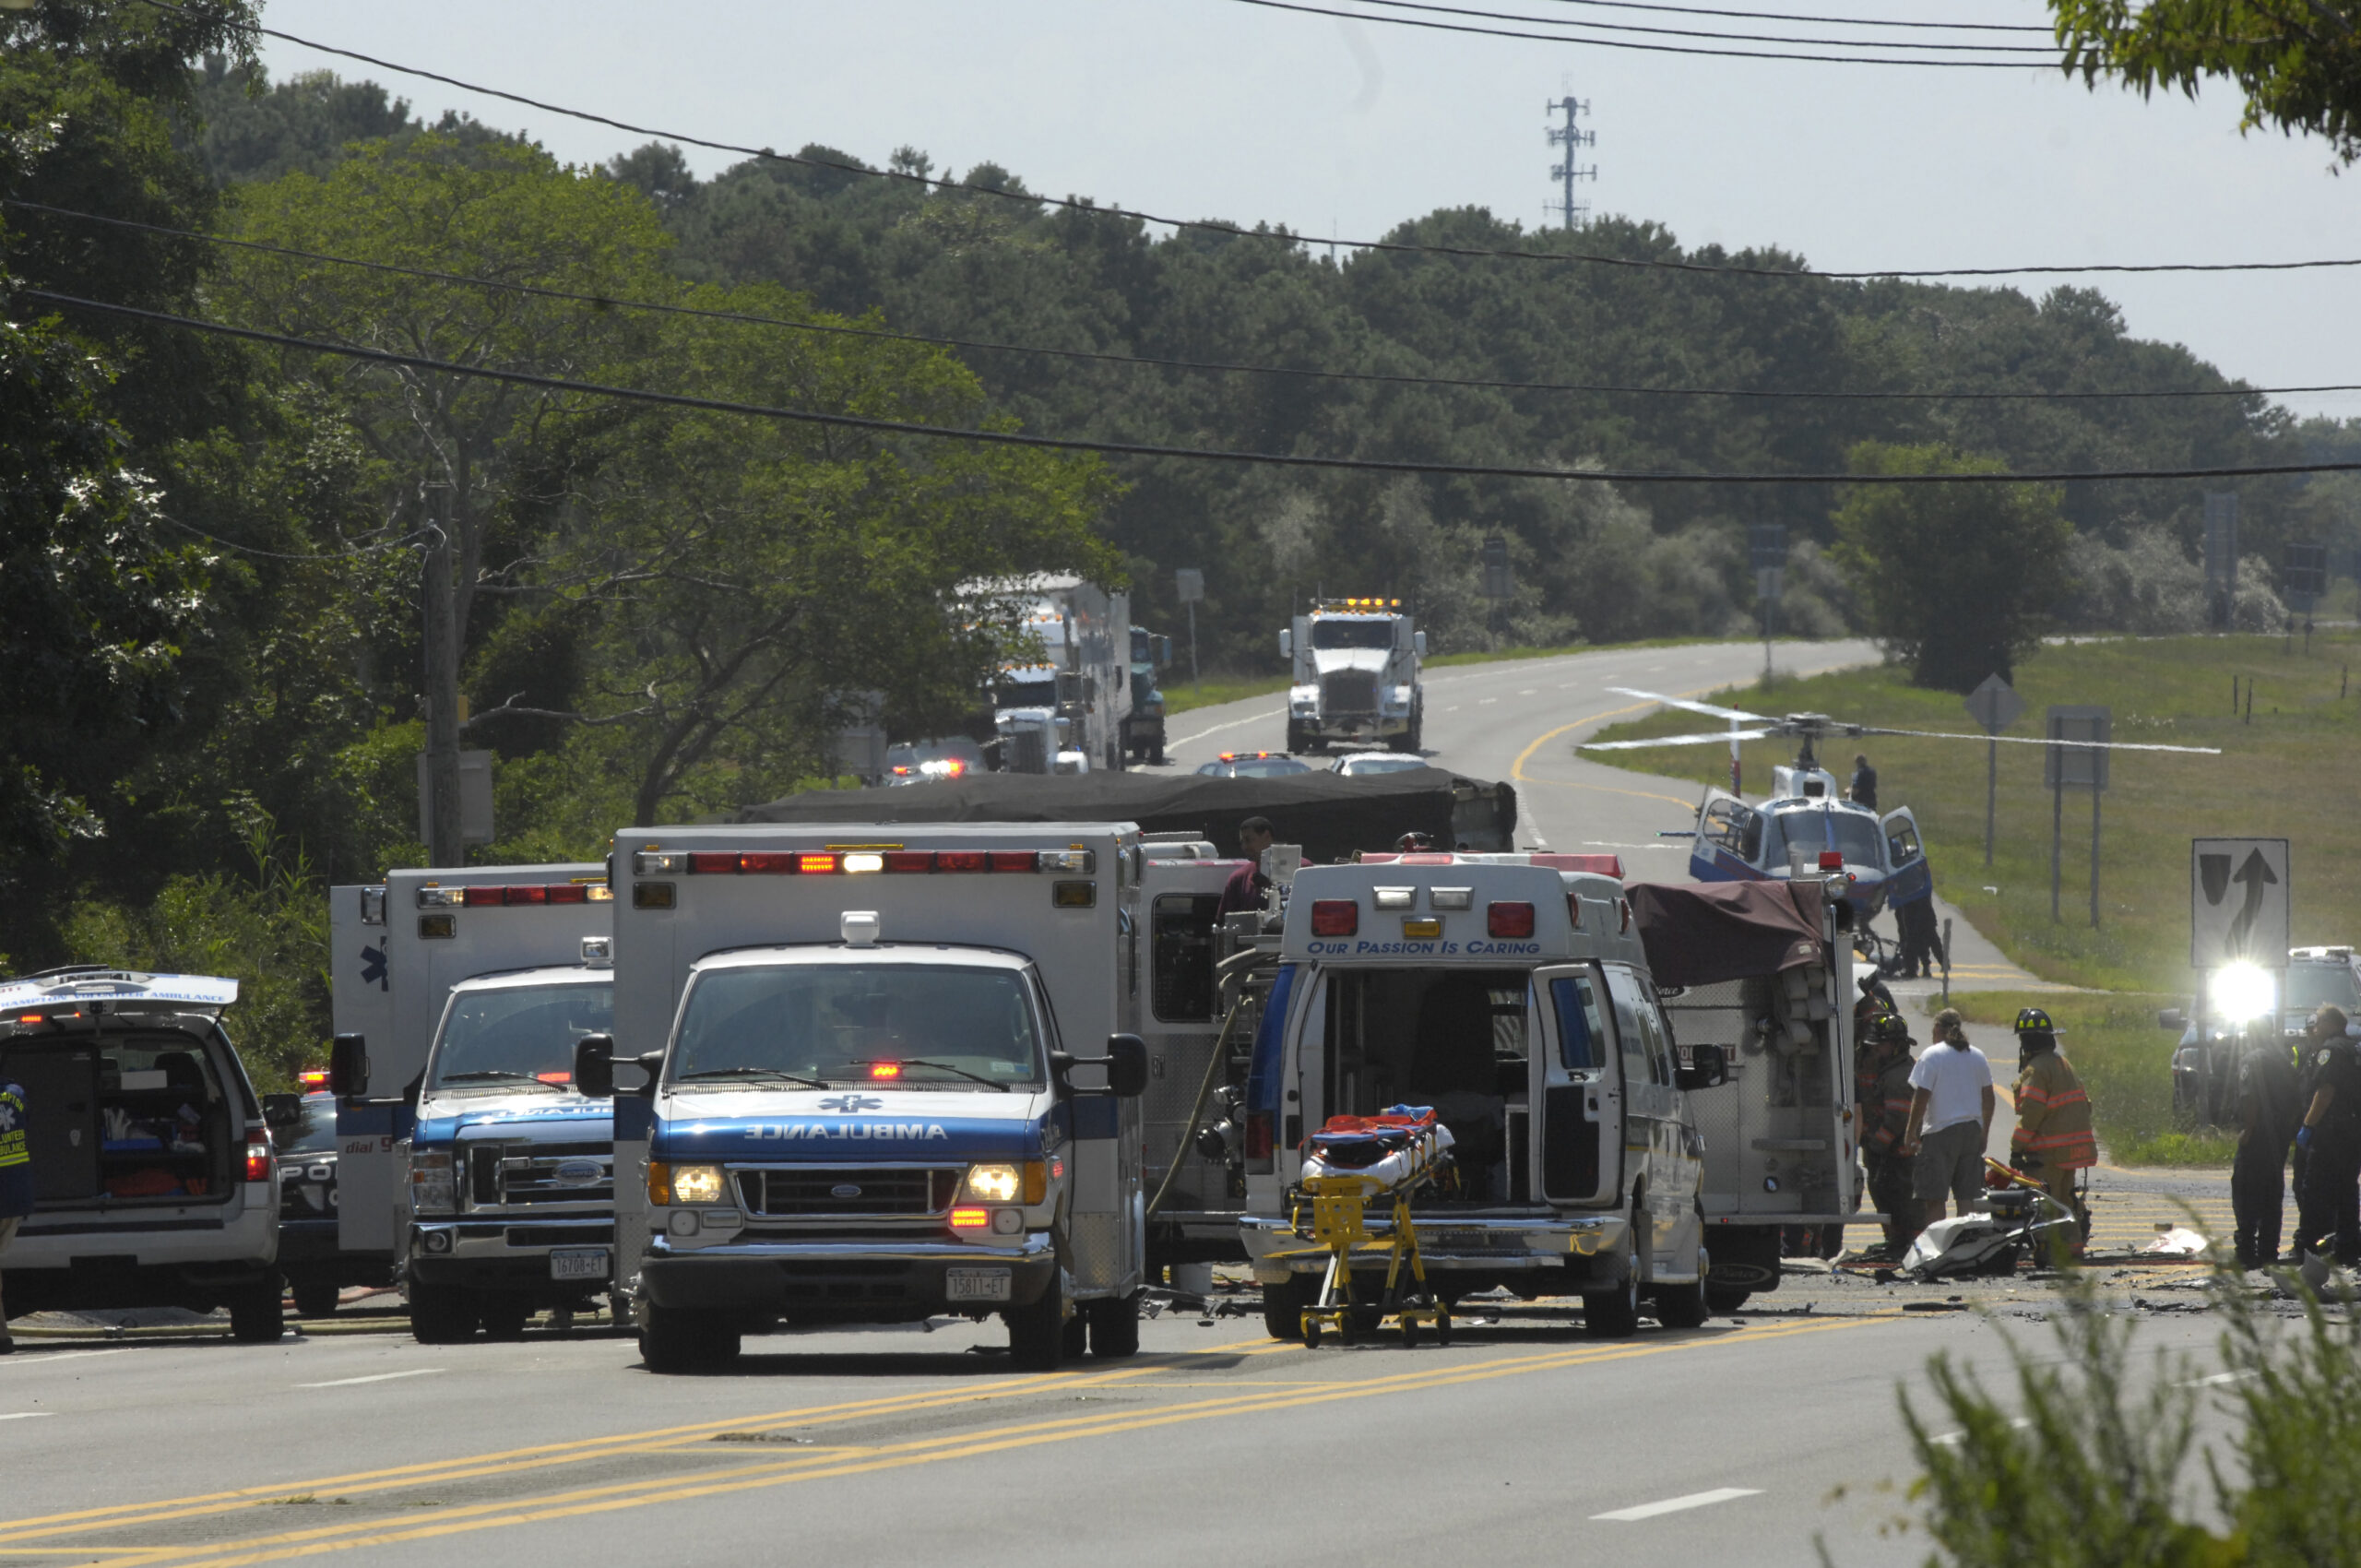 When emergency services are needed, local ambulances are there. But with costs soaring and a new state law in place, local fire departments are considering sending bills to insurance companies, and patients, for ambulance services.